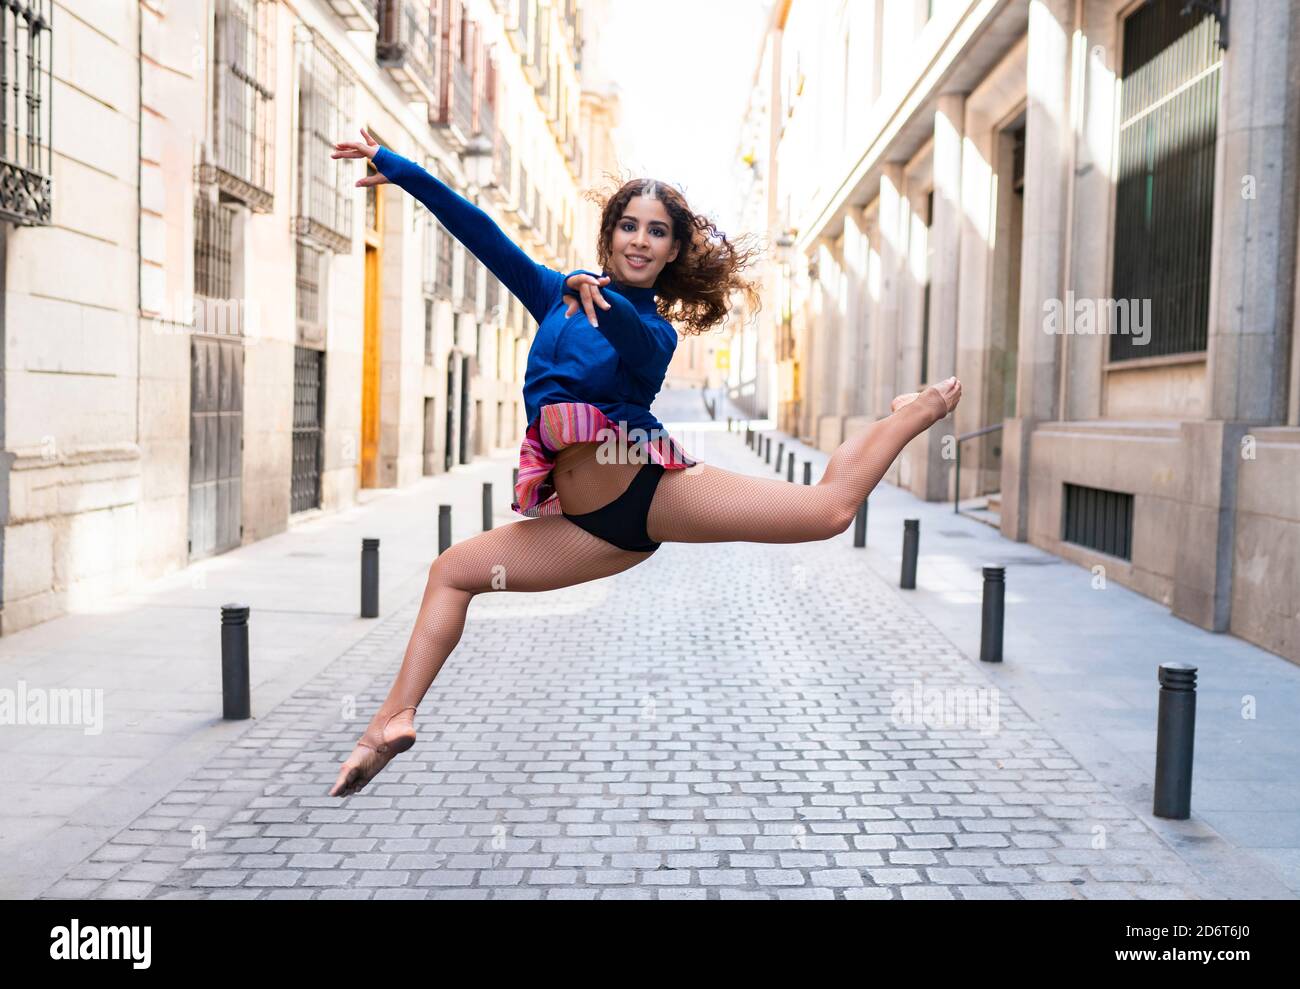 Full body of young fit ethnic female dancer with long curly hair doing grand jete position and smiling on paved street looking at camera Stock Photo